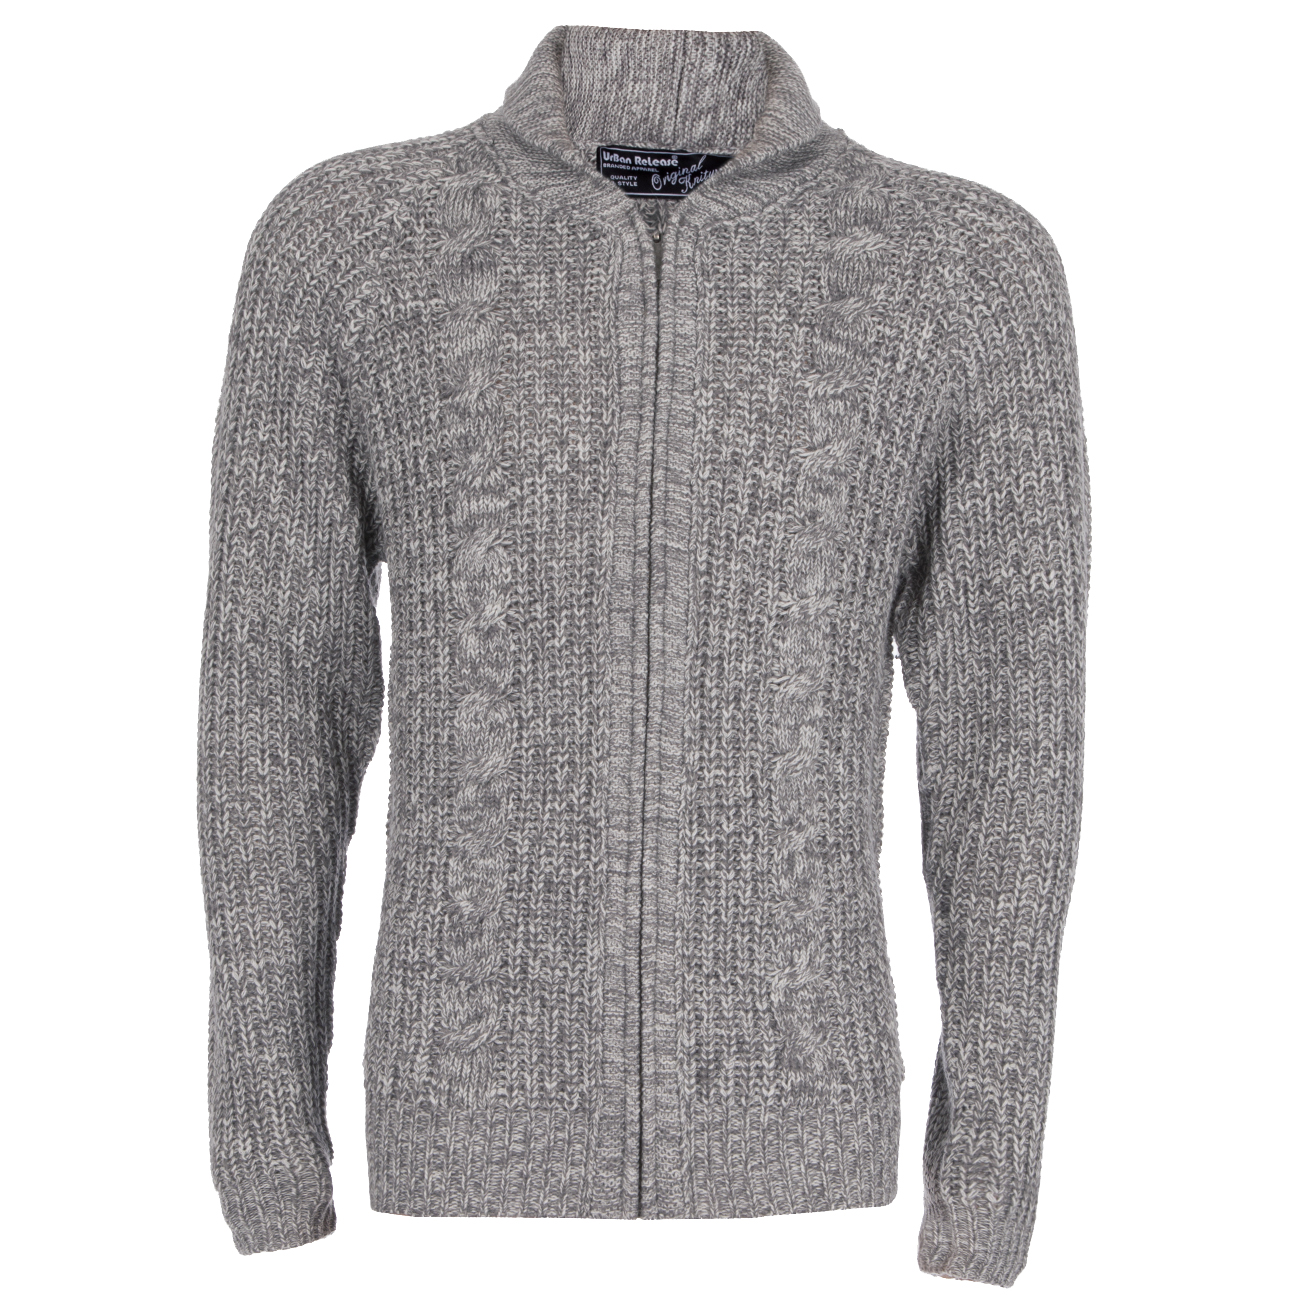 Mens Zip Up Cardigan Wool Acrylic Blend Extra Warm Knitted Cable Knit ...